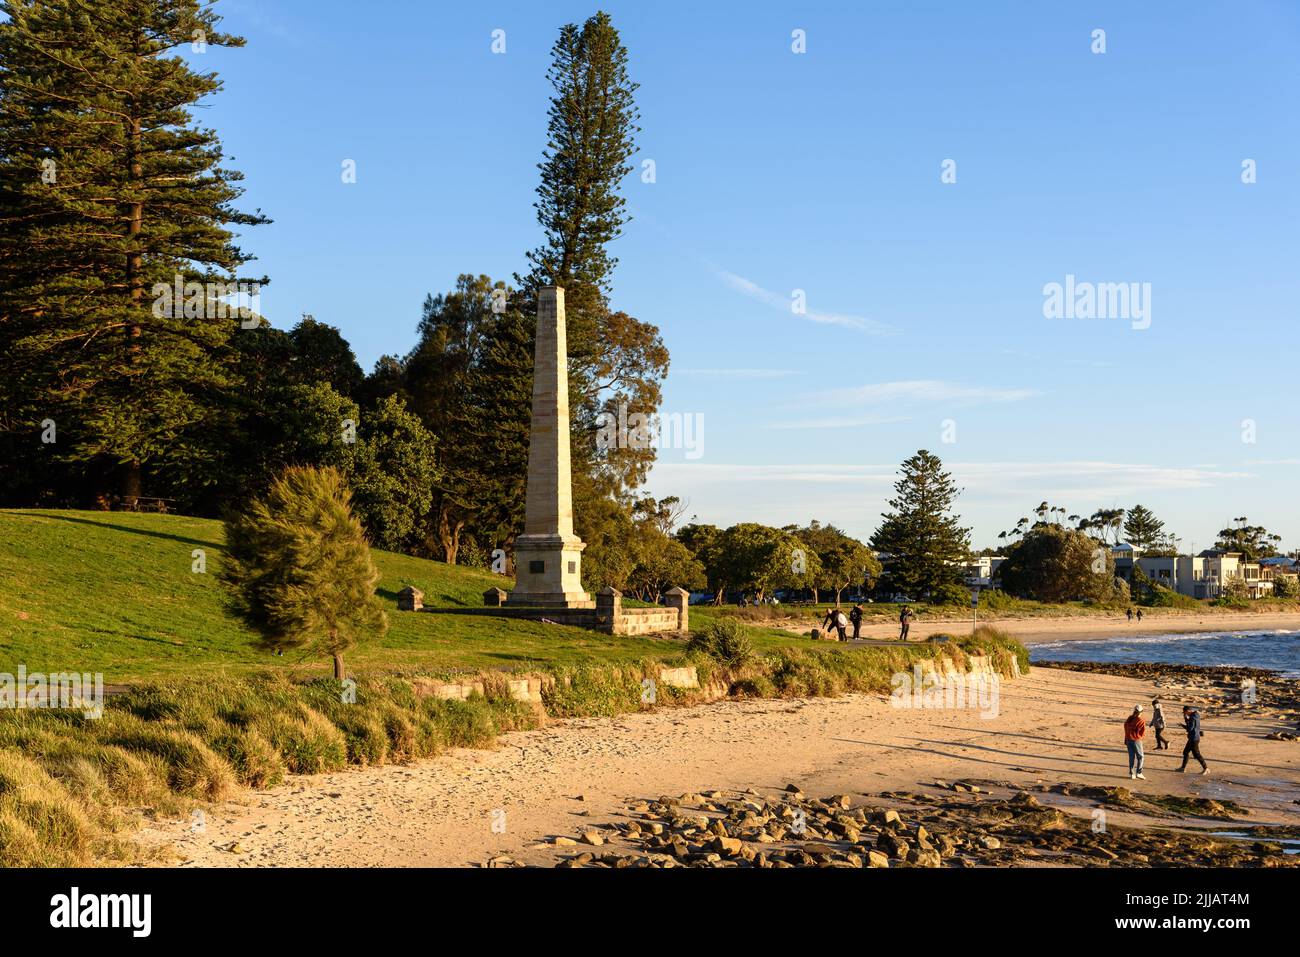 The obelisk marking Captain Cook's Landing Place in Botany Bay, New South Wales Stock Photo